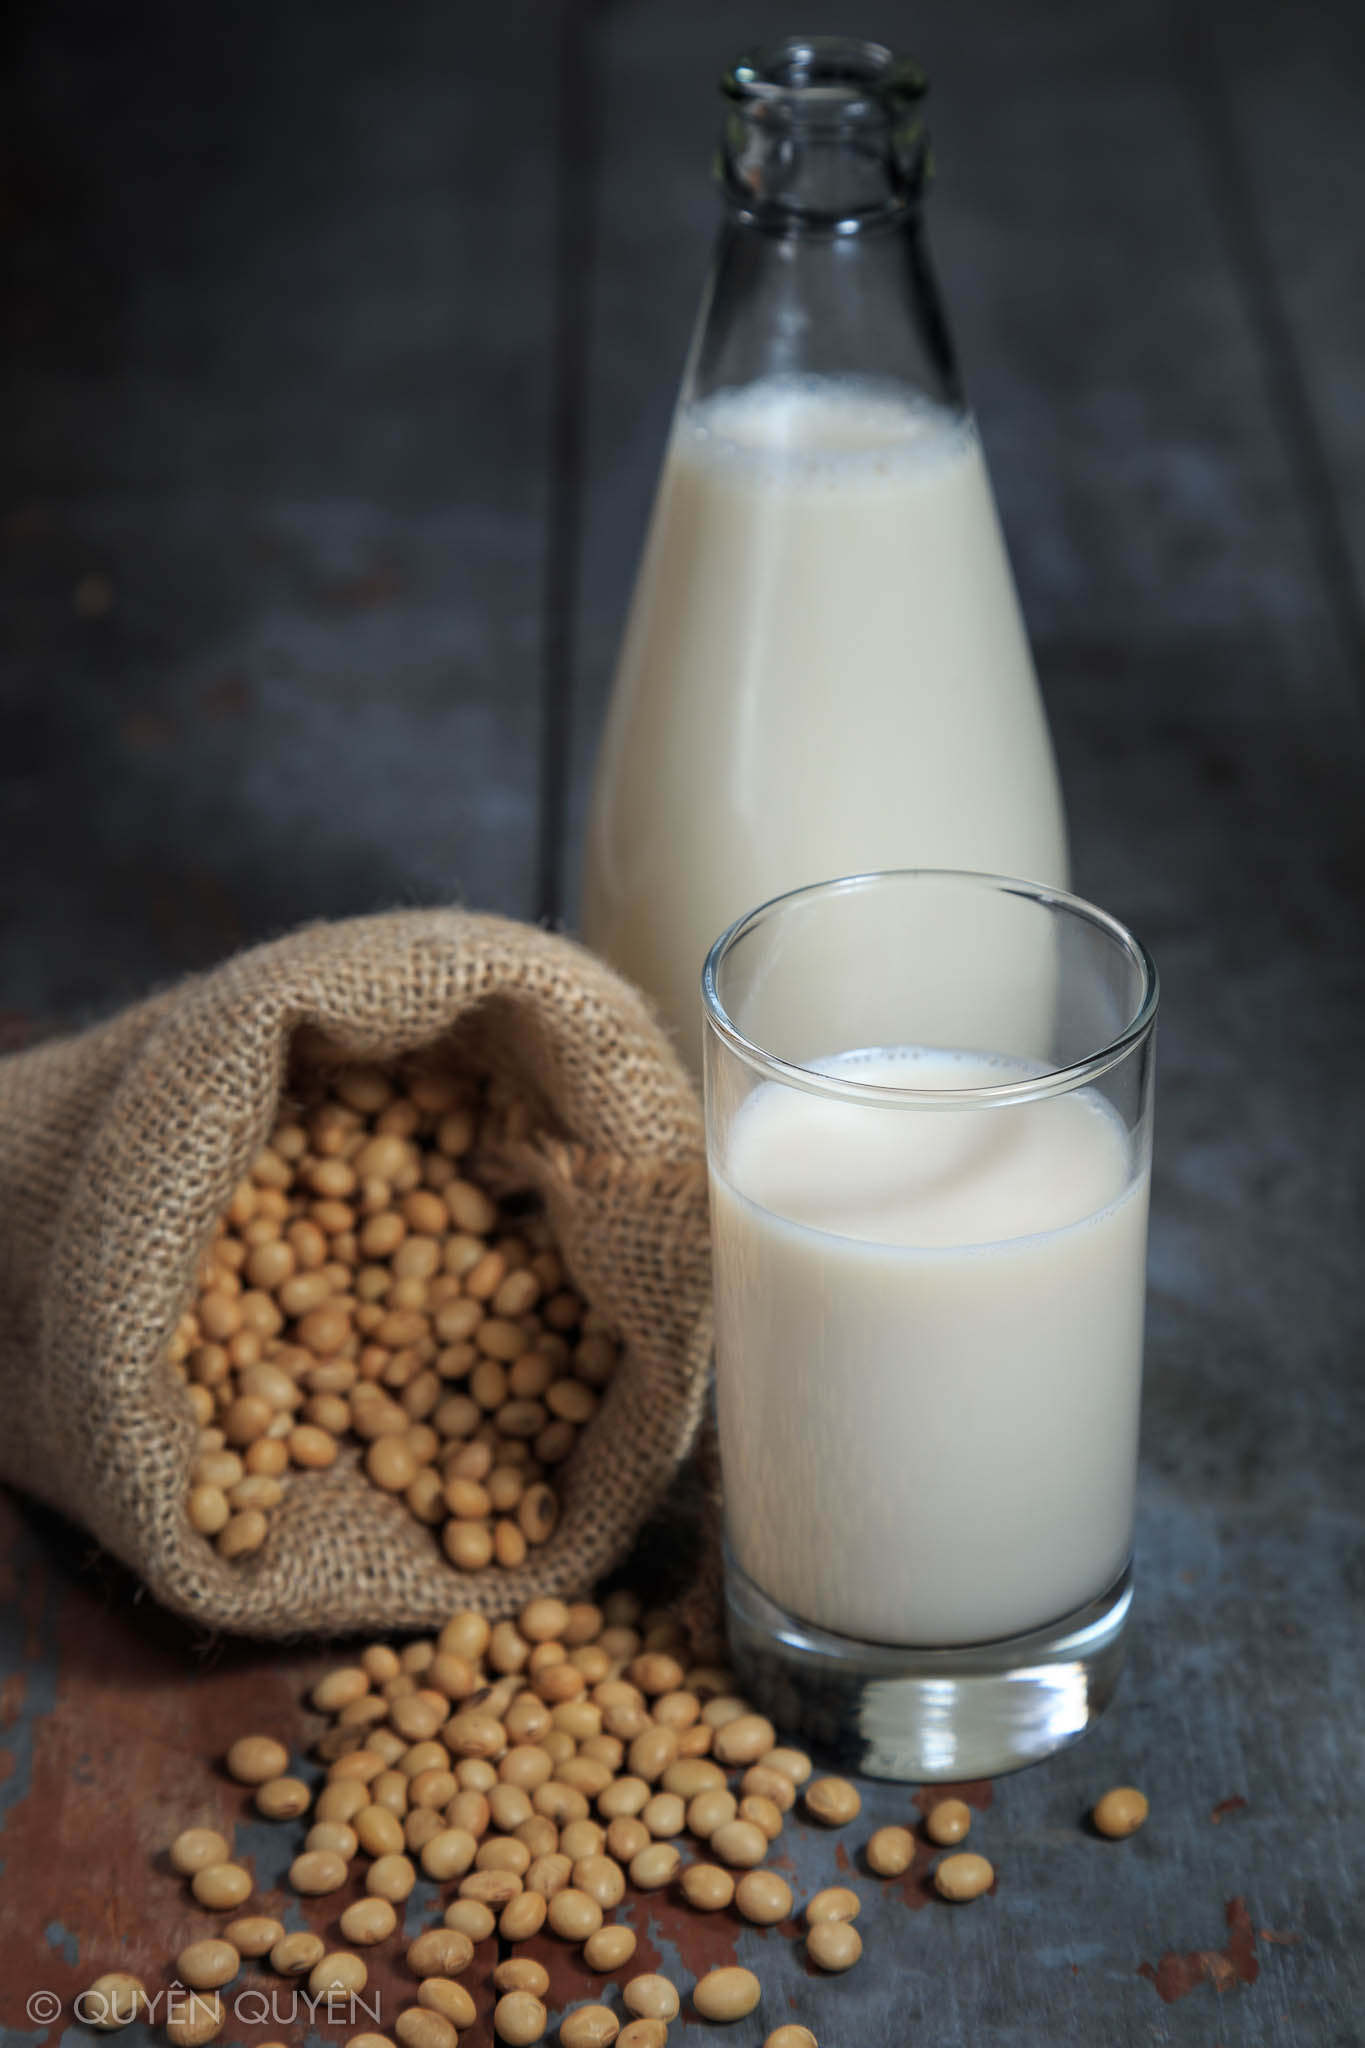 Does eating Soy foods cause cancer?